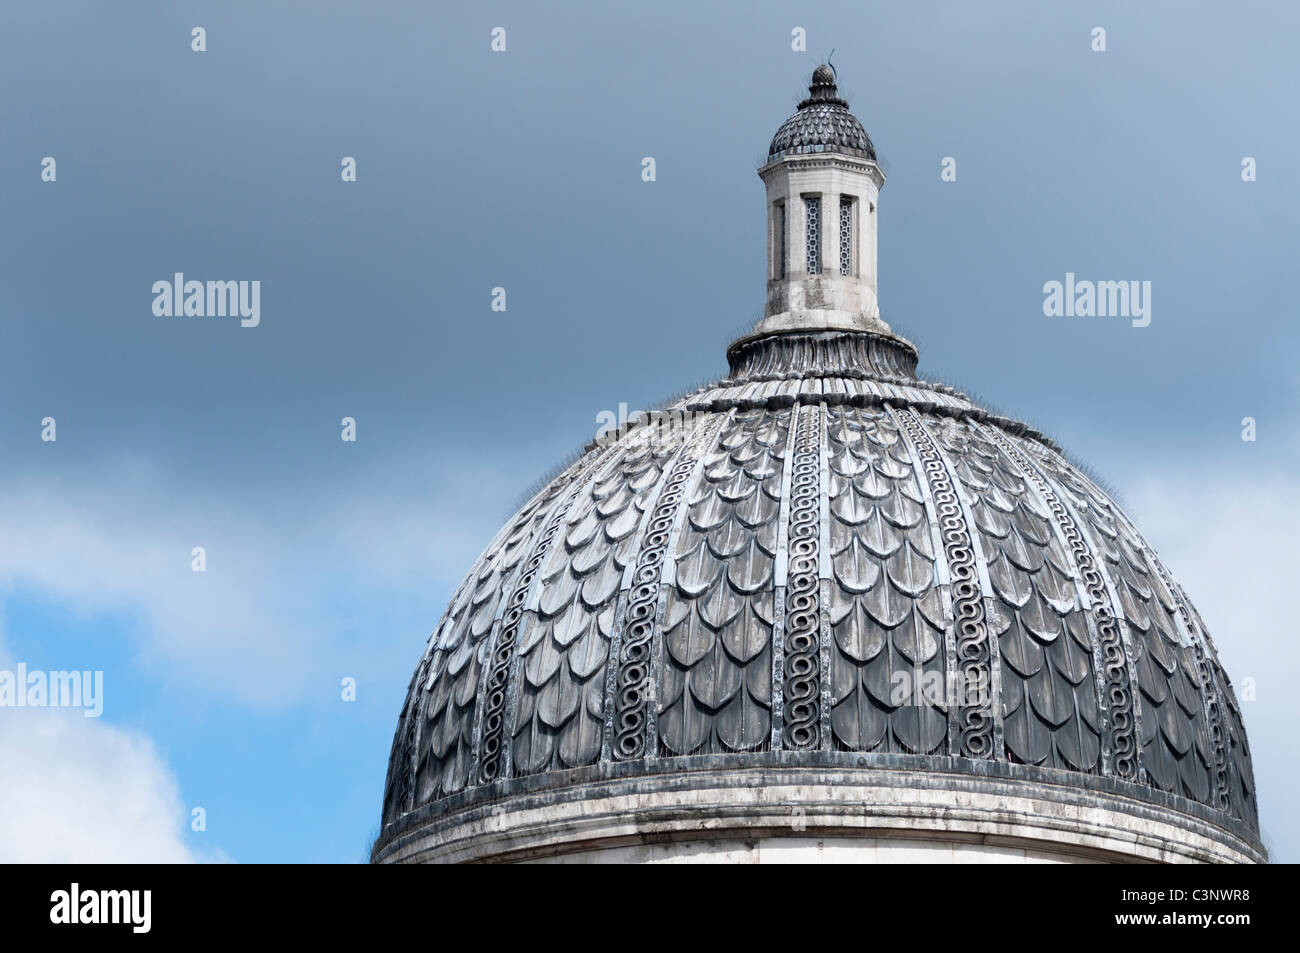 The domed roof of the National Gellery in London,England,UK Stock Photo